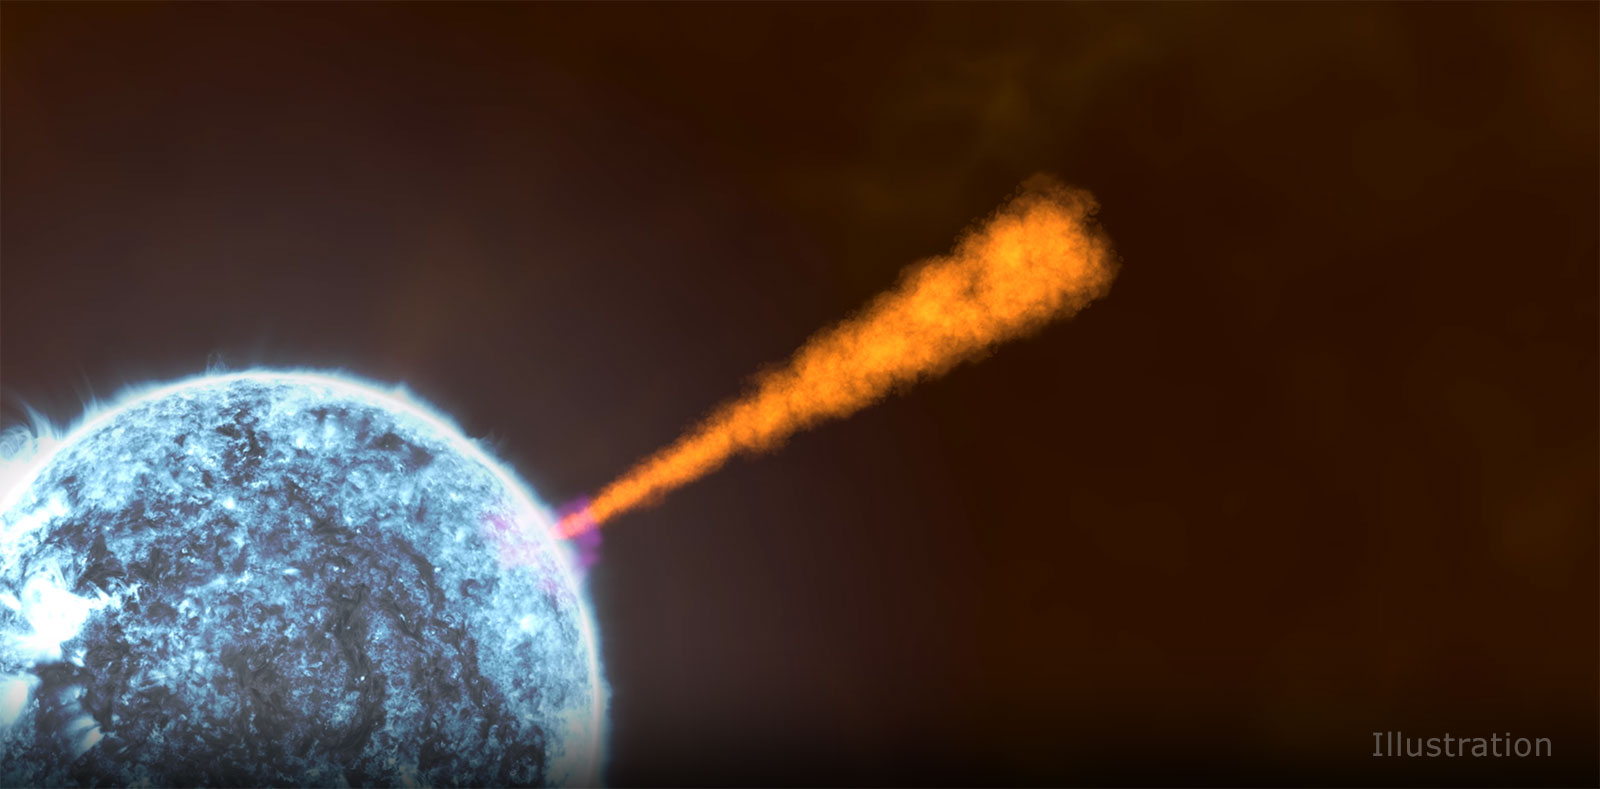 A jet of particles pierces a star as it collapses into a black hole in this artists concept of a typical gamma-ray burst. The star, in the lower left corner, is swirled with light blue and gray features on its surface.